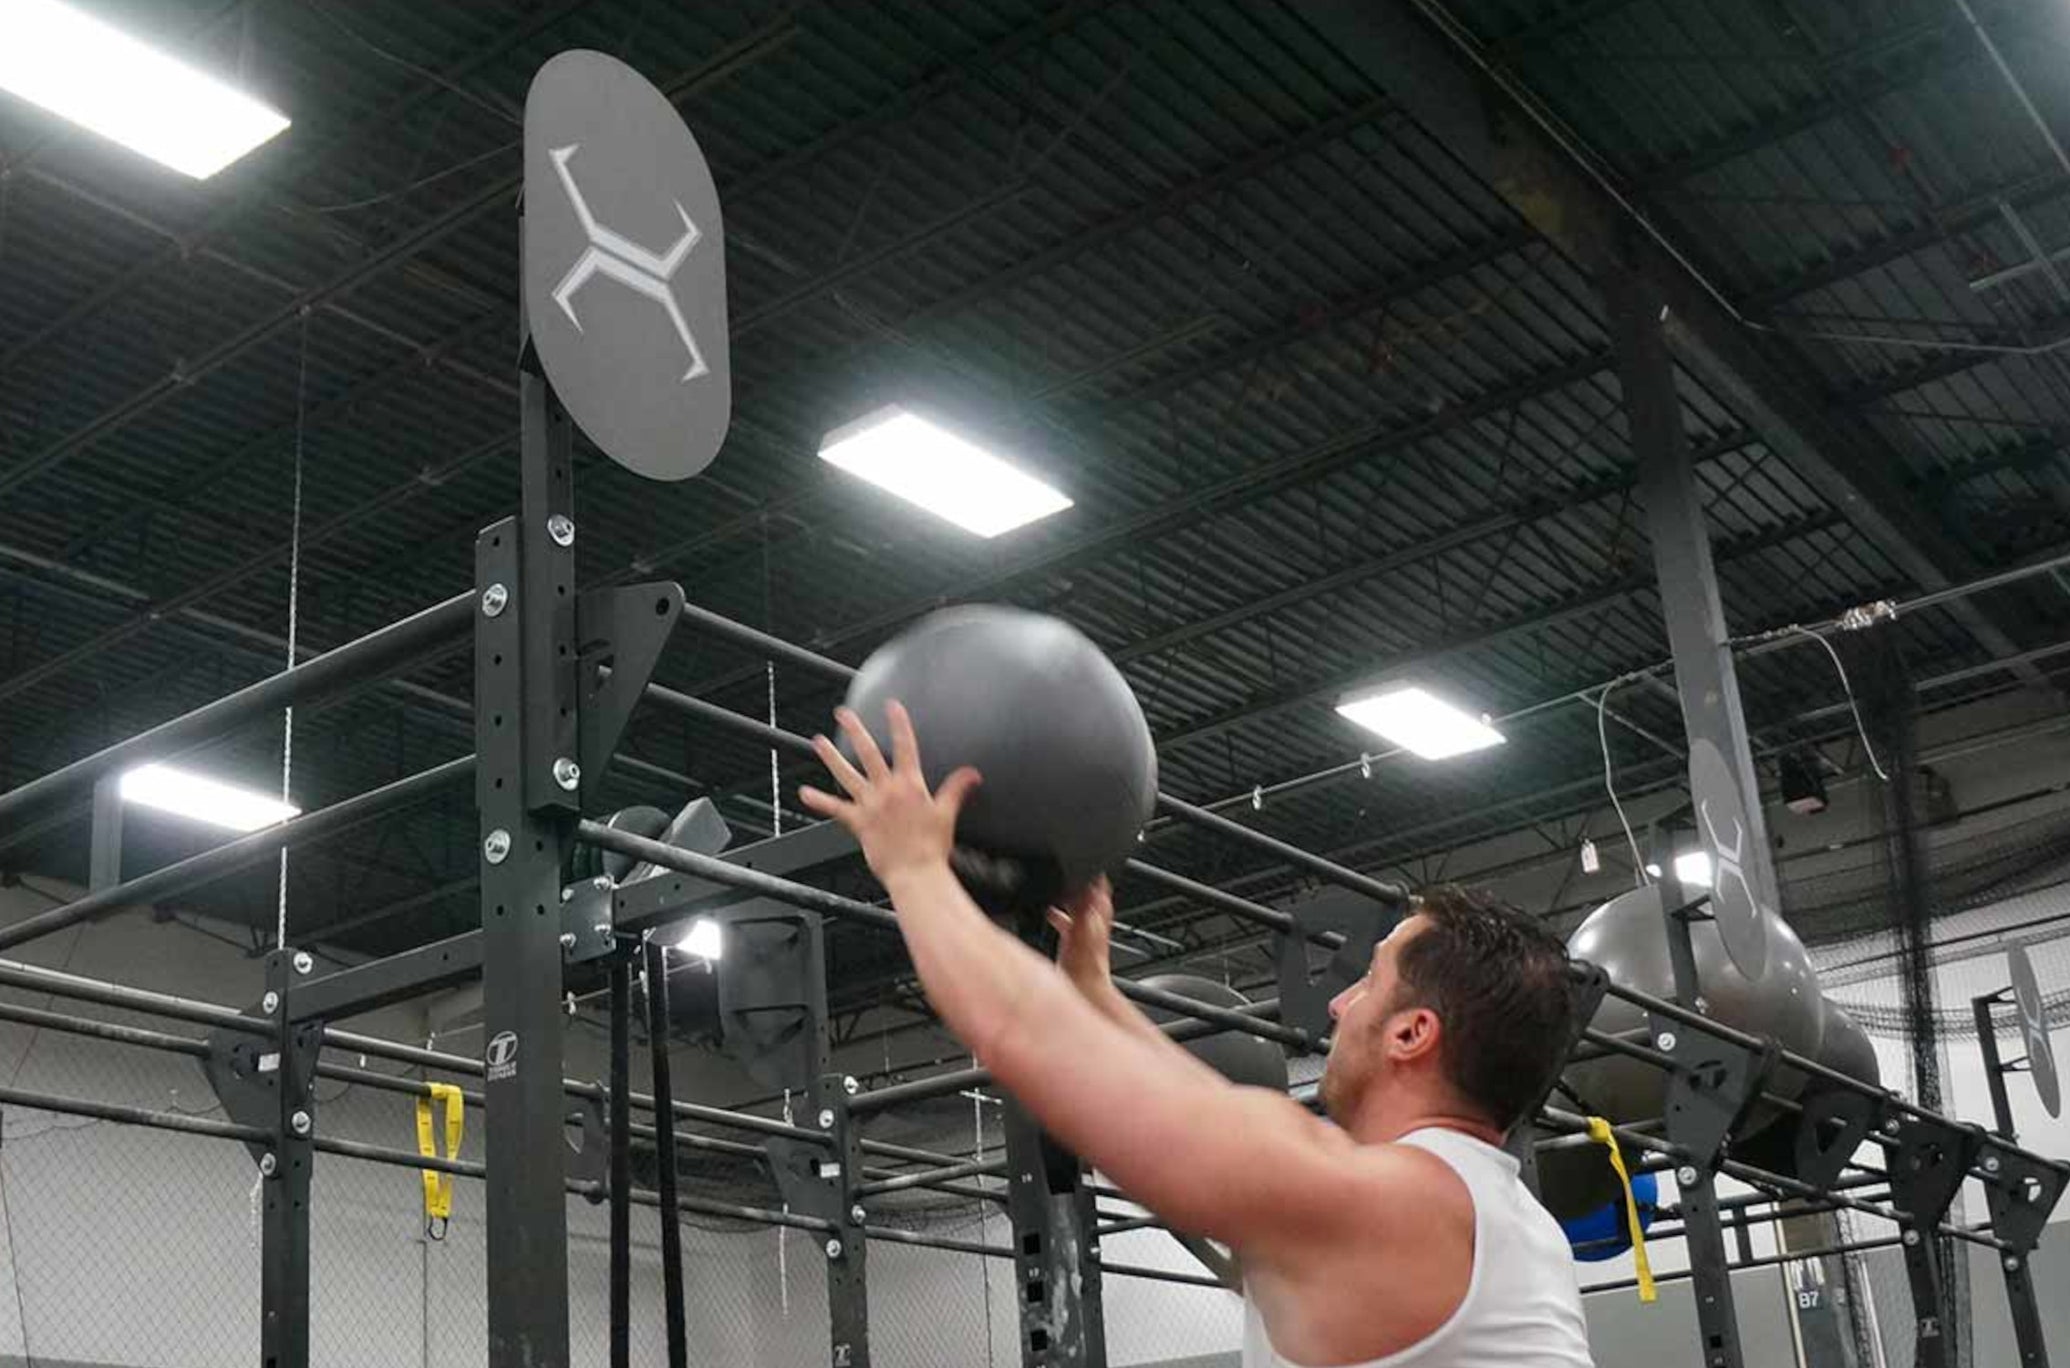 Man Throwing Wall Ball On Ball Target Attached To Rack